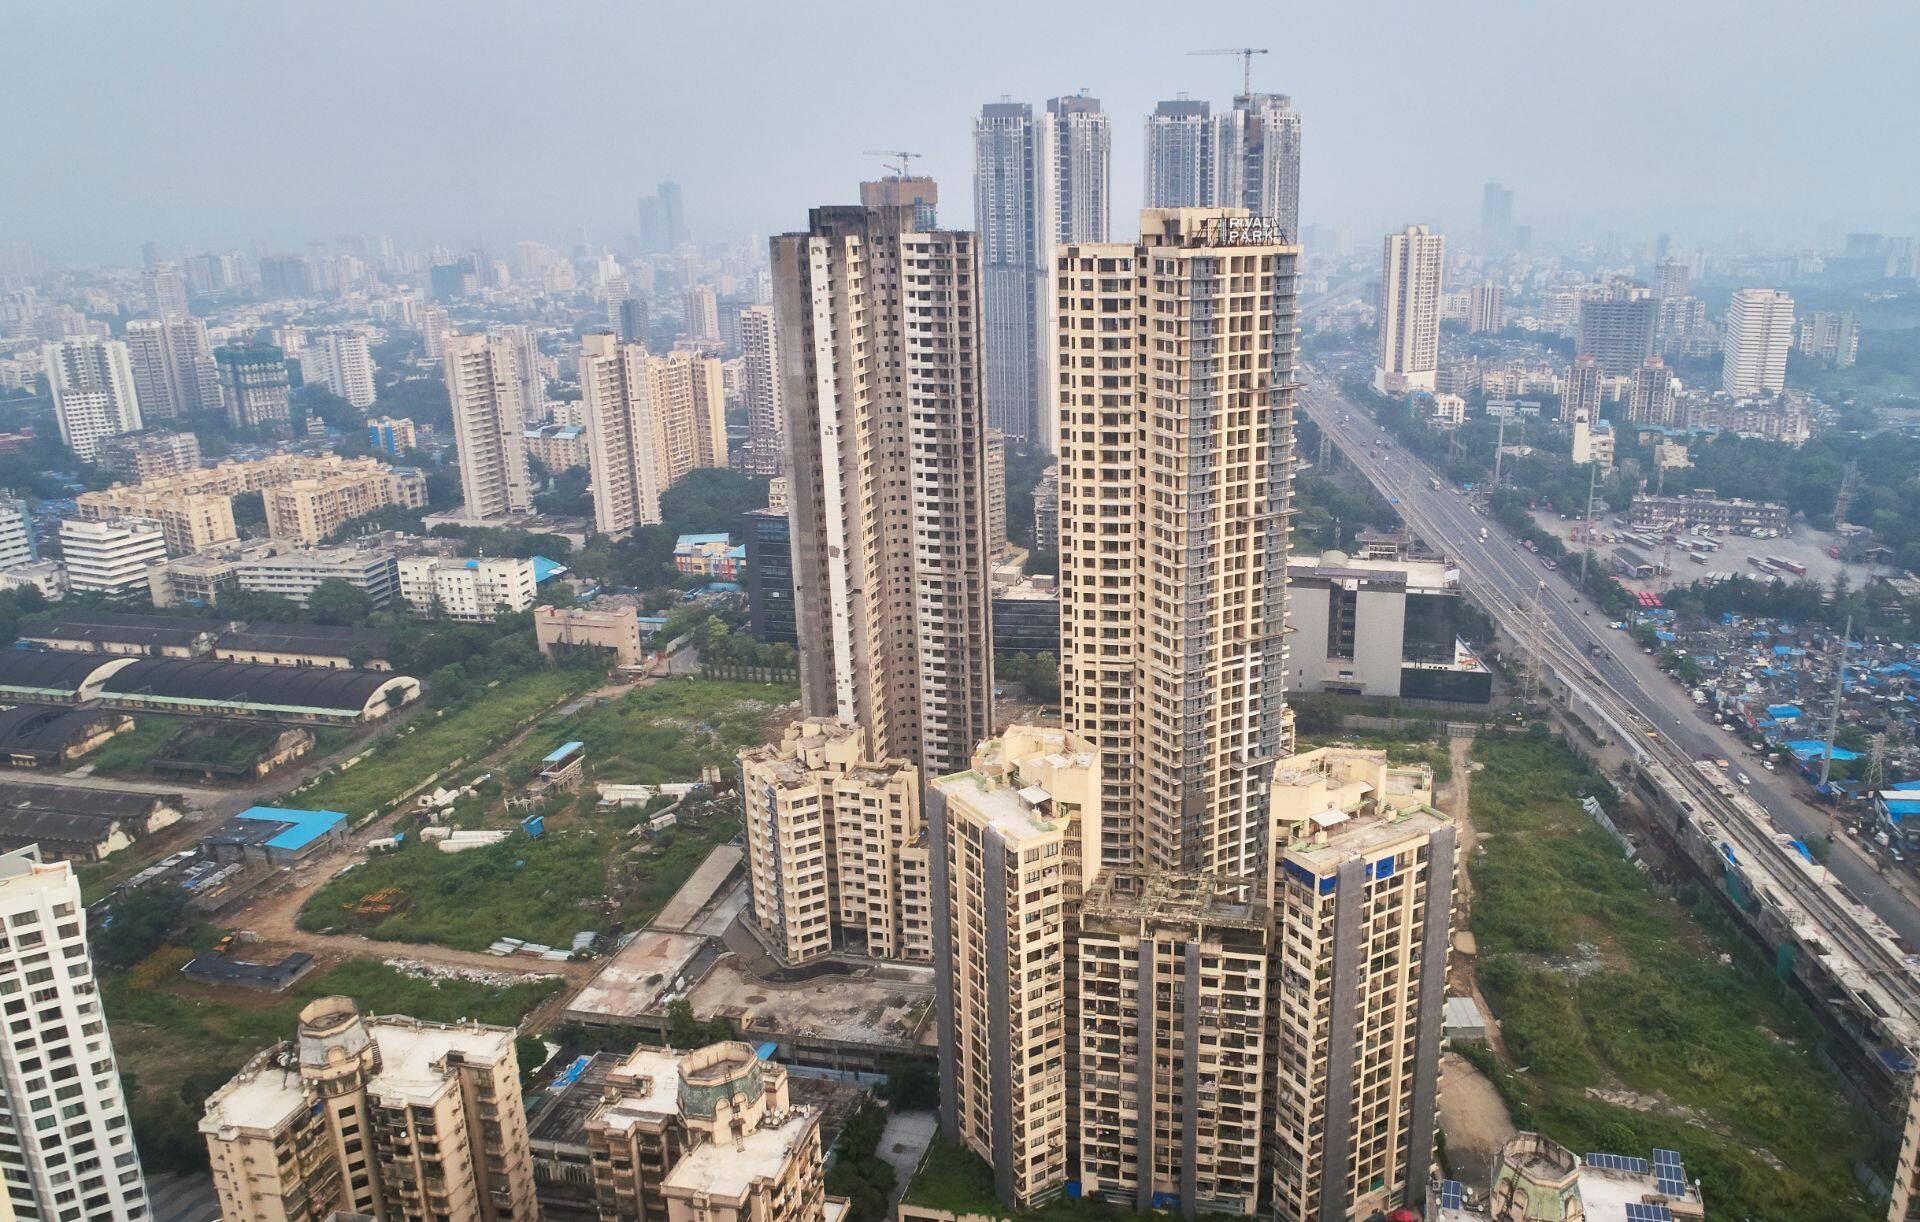 Exclusive: HDFC Capital Affordable Real Estate Fund invests about Rs 560 crore in housing project by CCI Projects in Mumbai